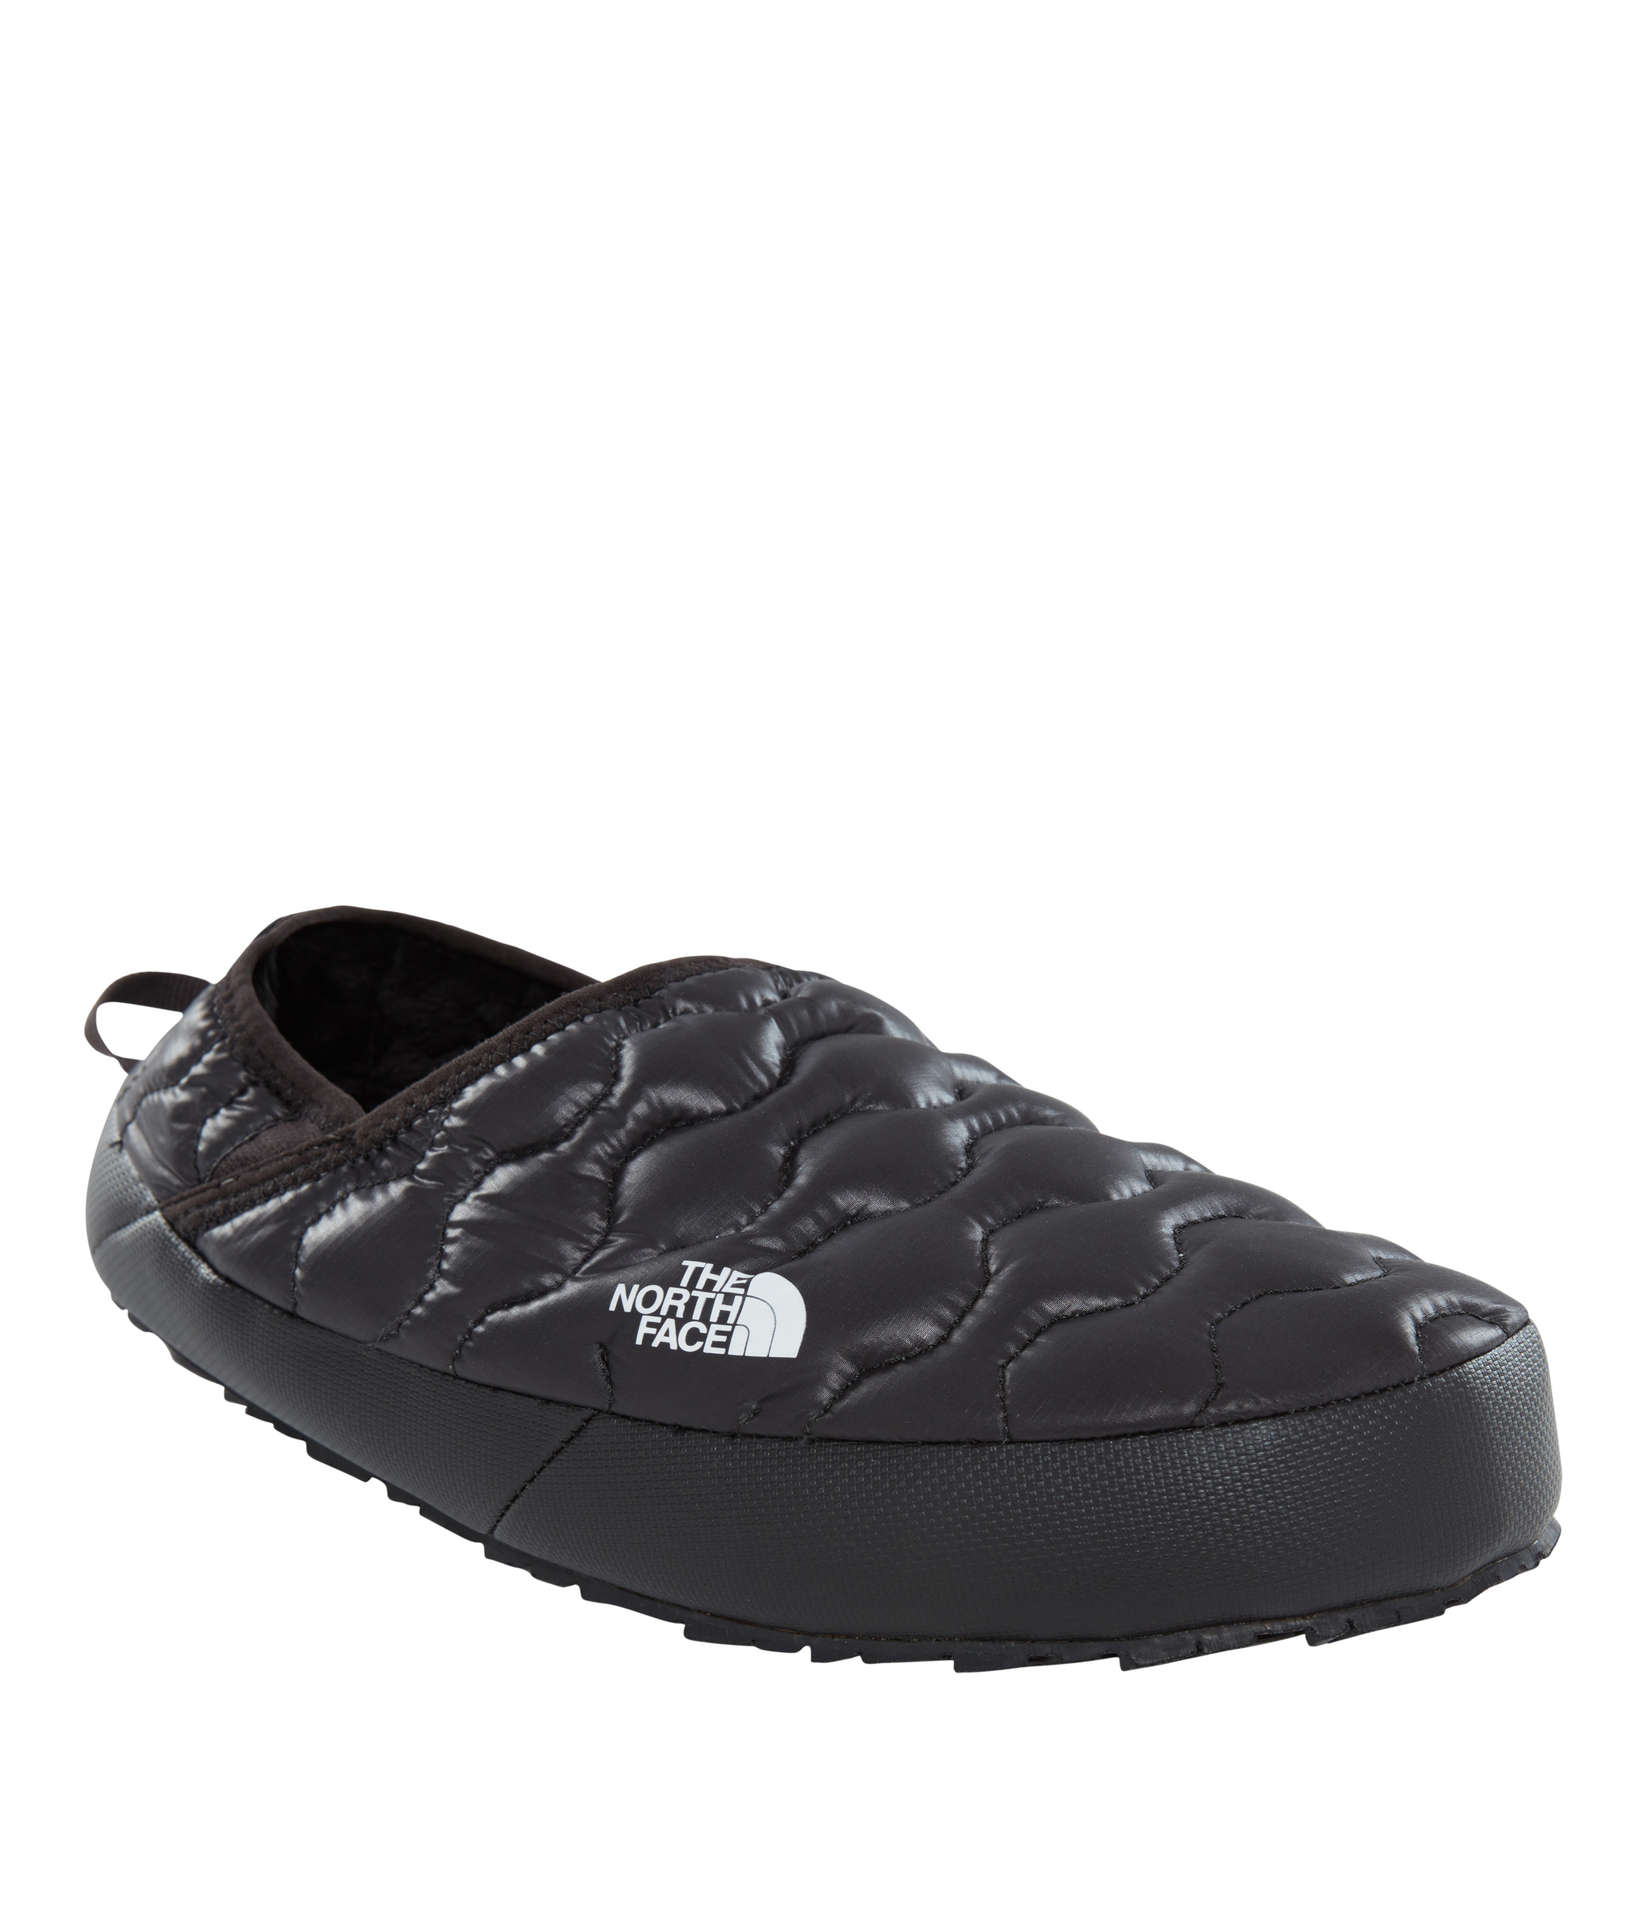 The North Face ThermoBall Traction Mule IV Sloffen Zwart/Grijs Heren